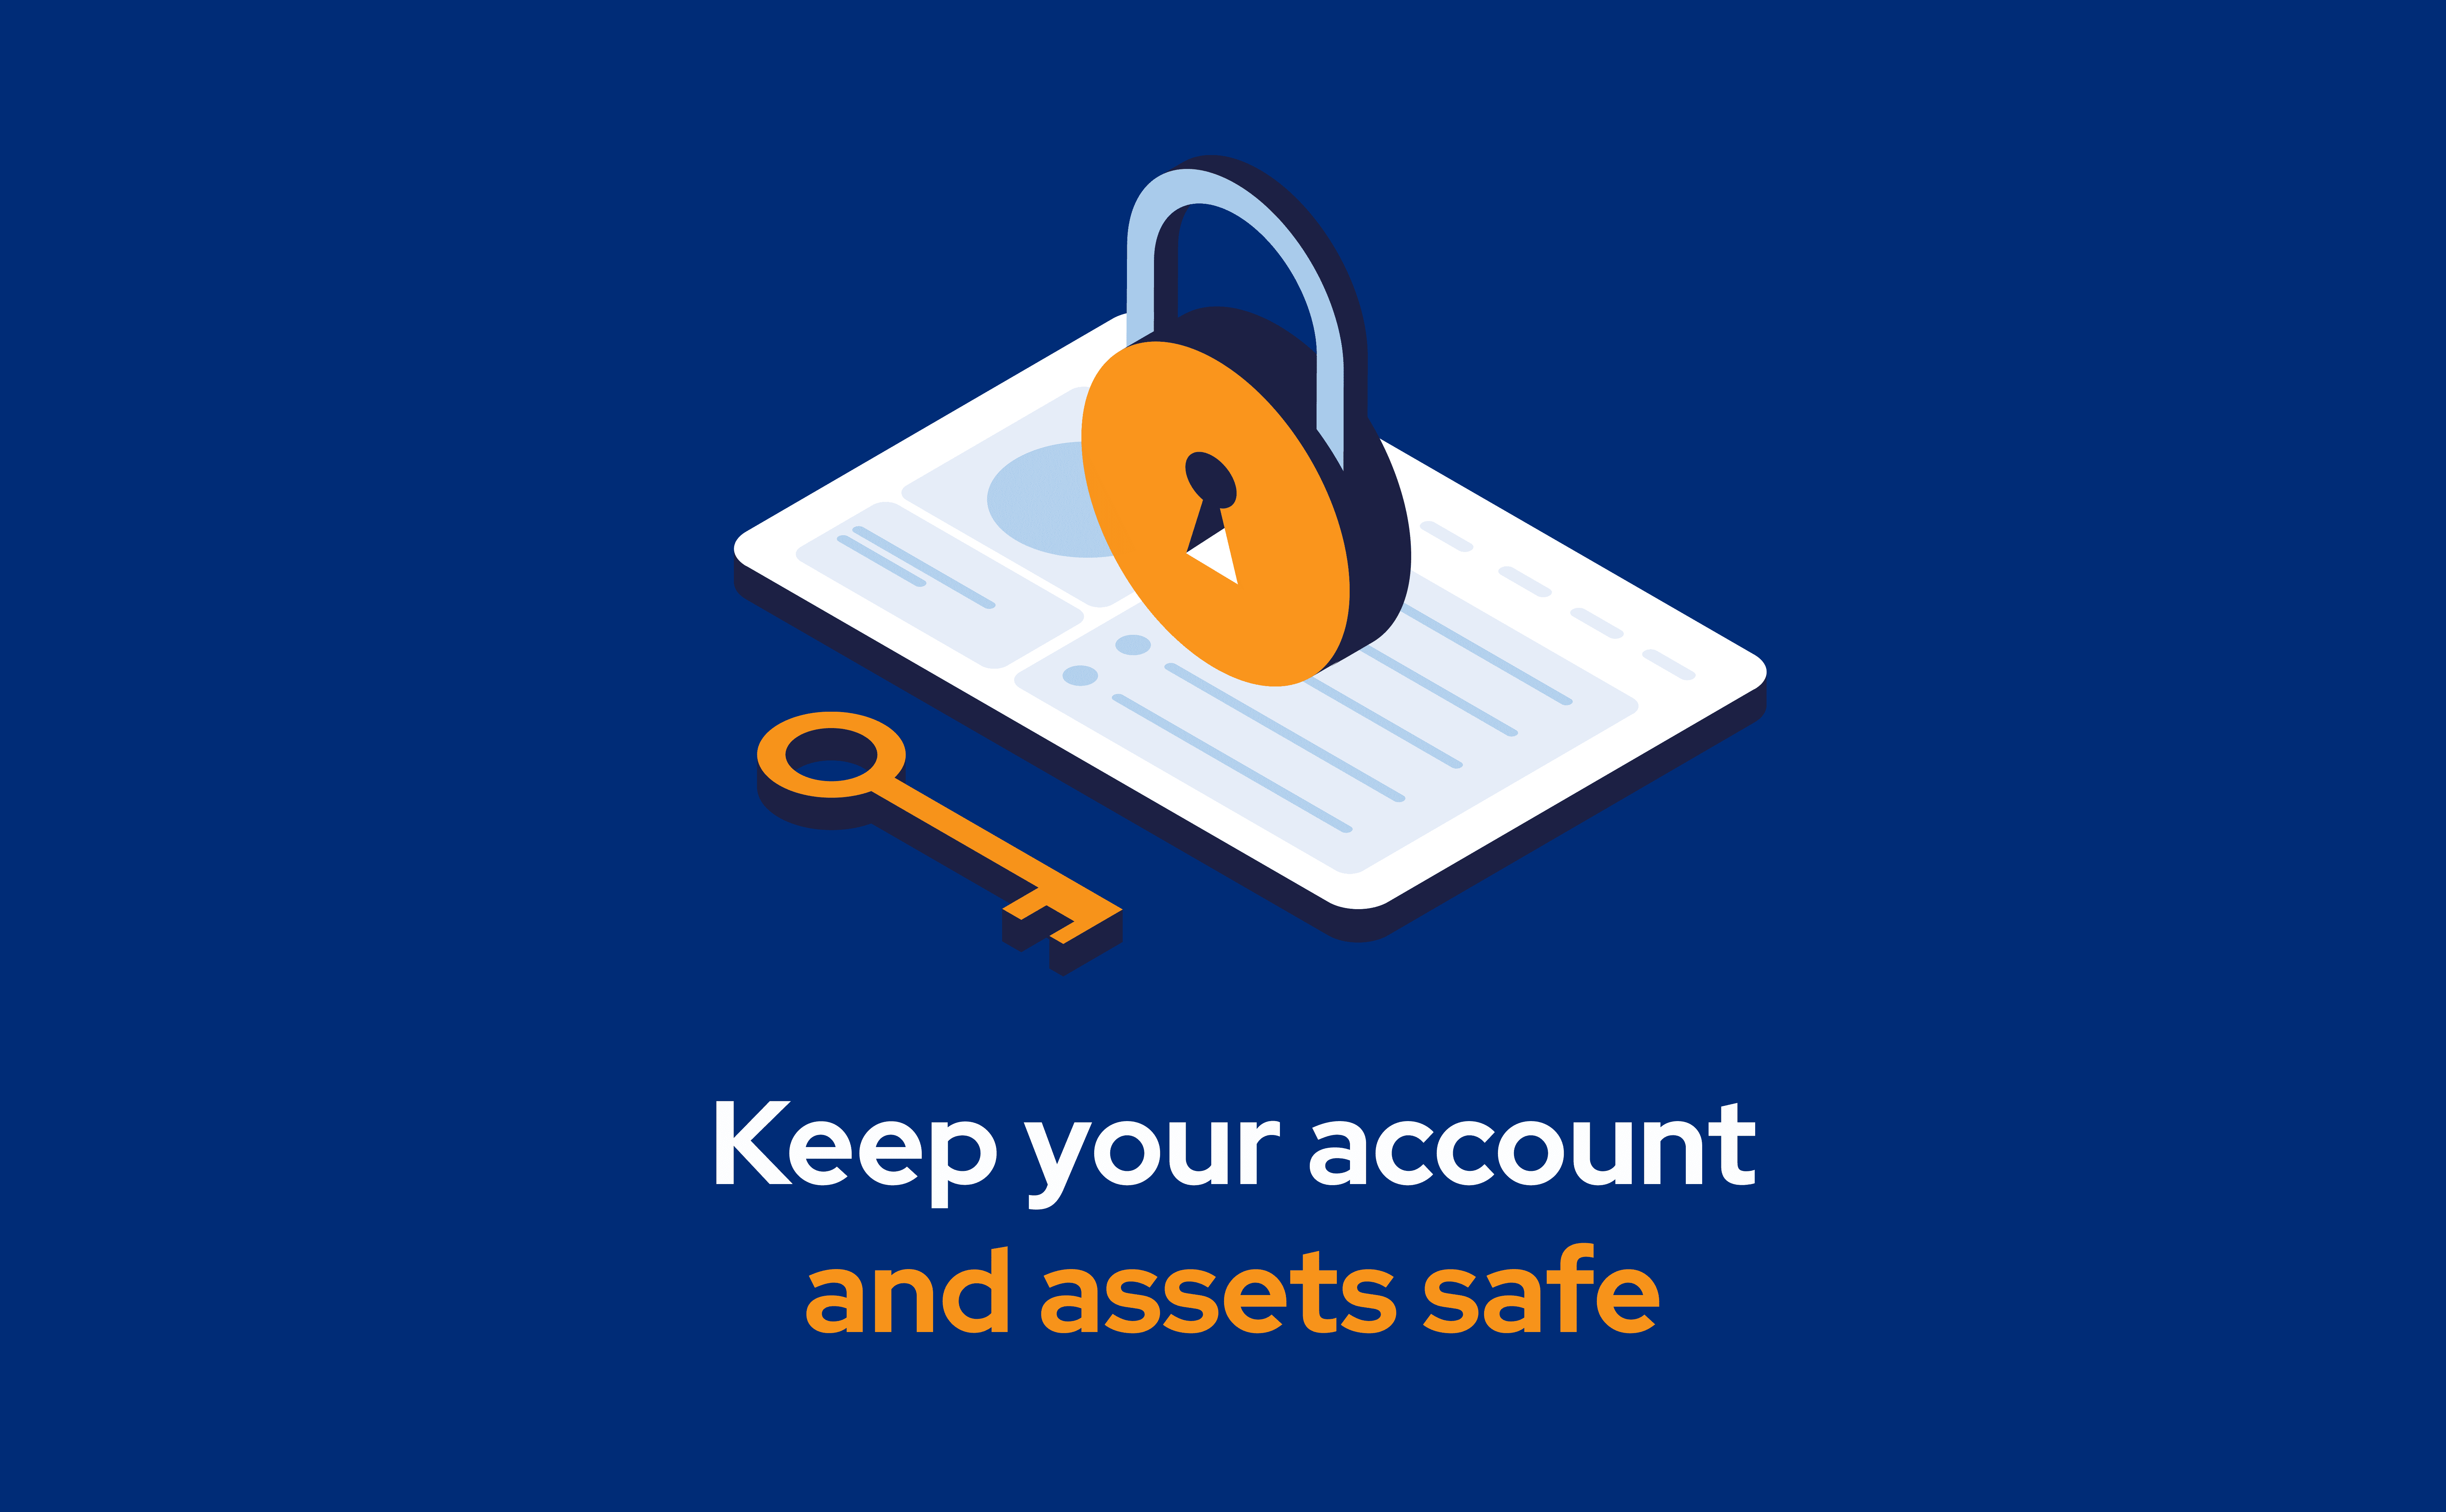 Cyber Security Awareness Month - Keep your account and assets safe